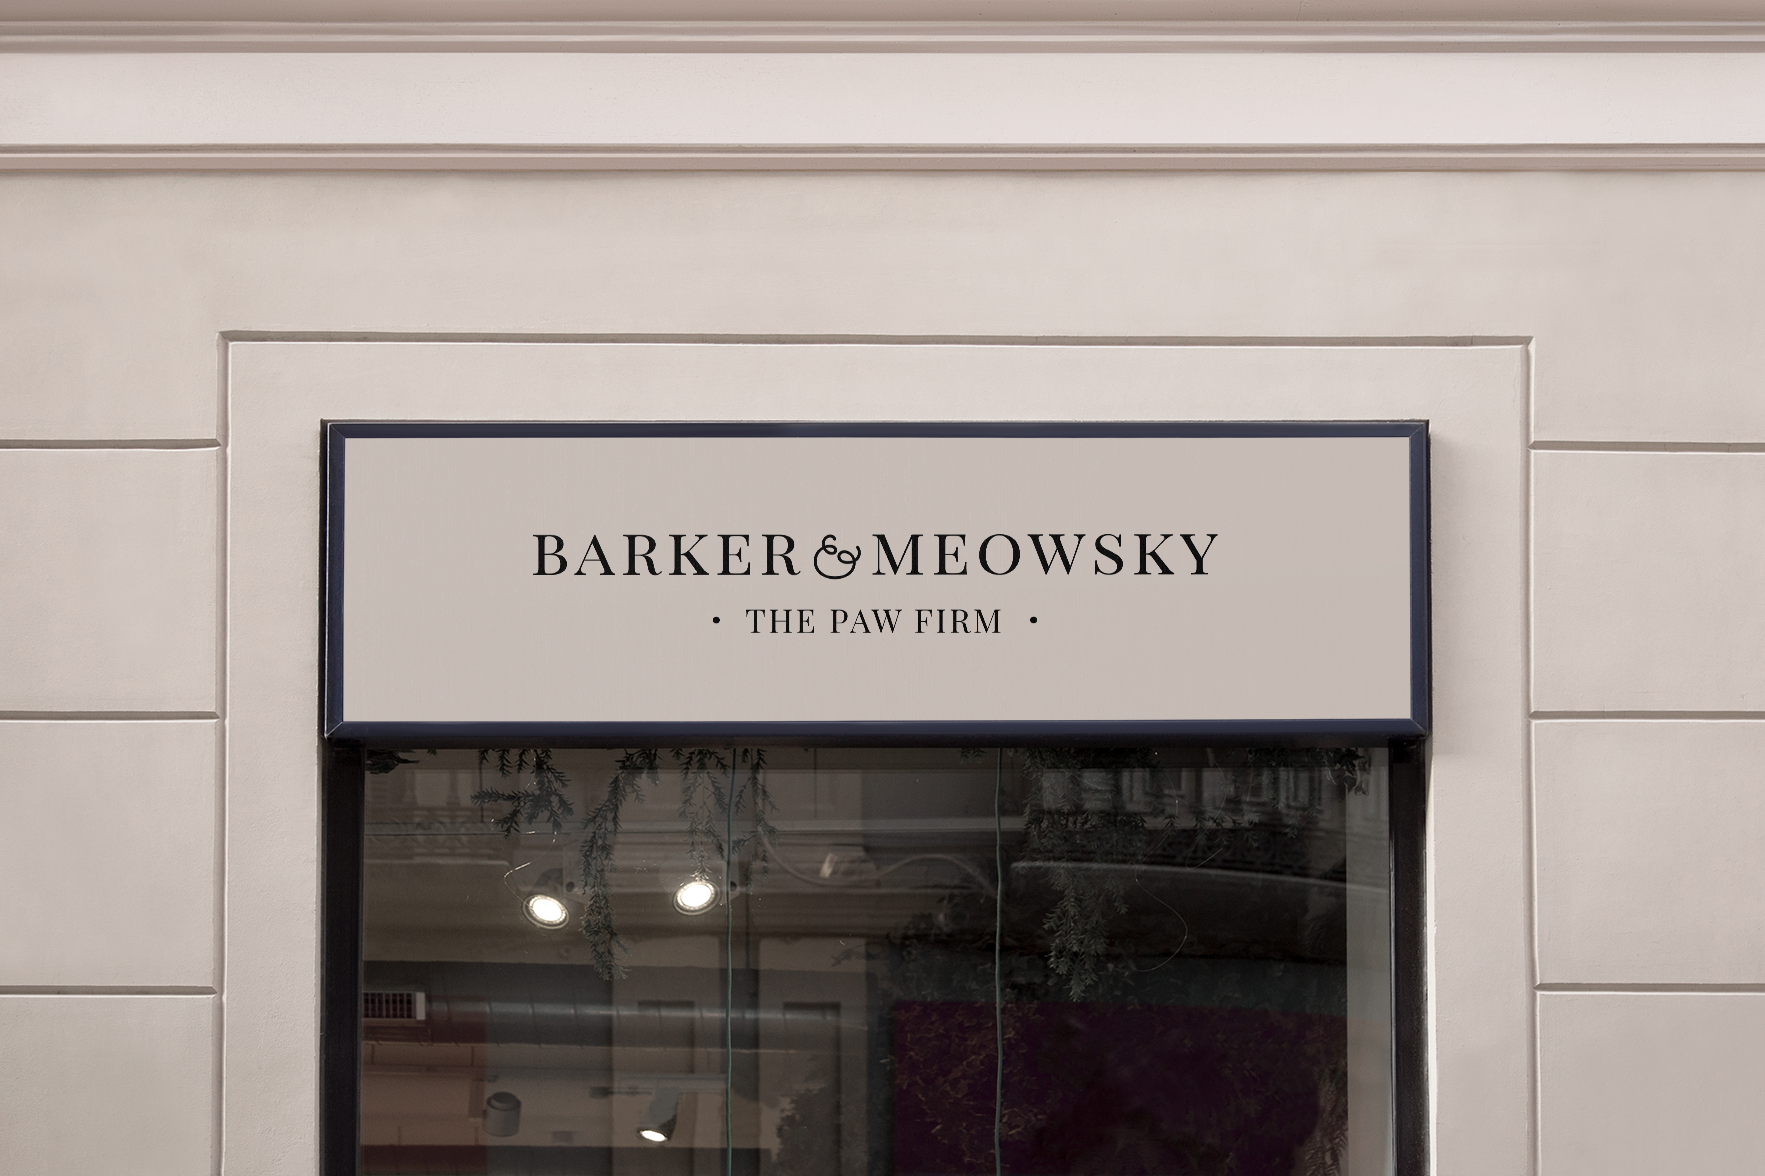 barker & meowsky - a paw firm